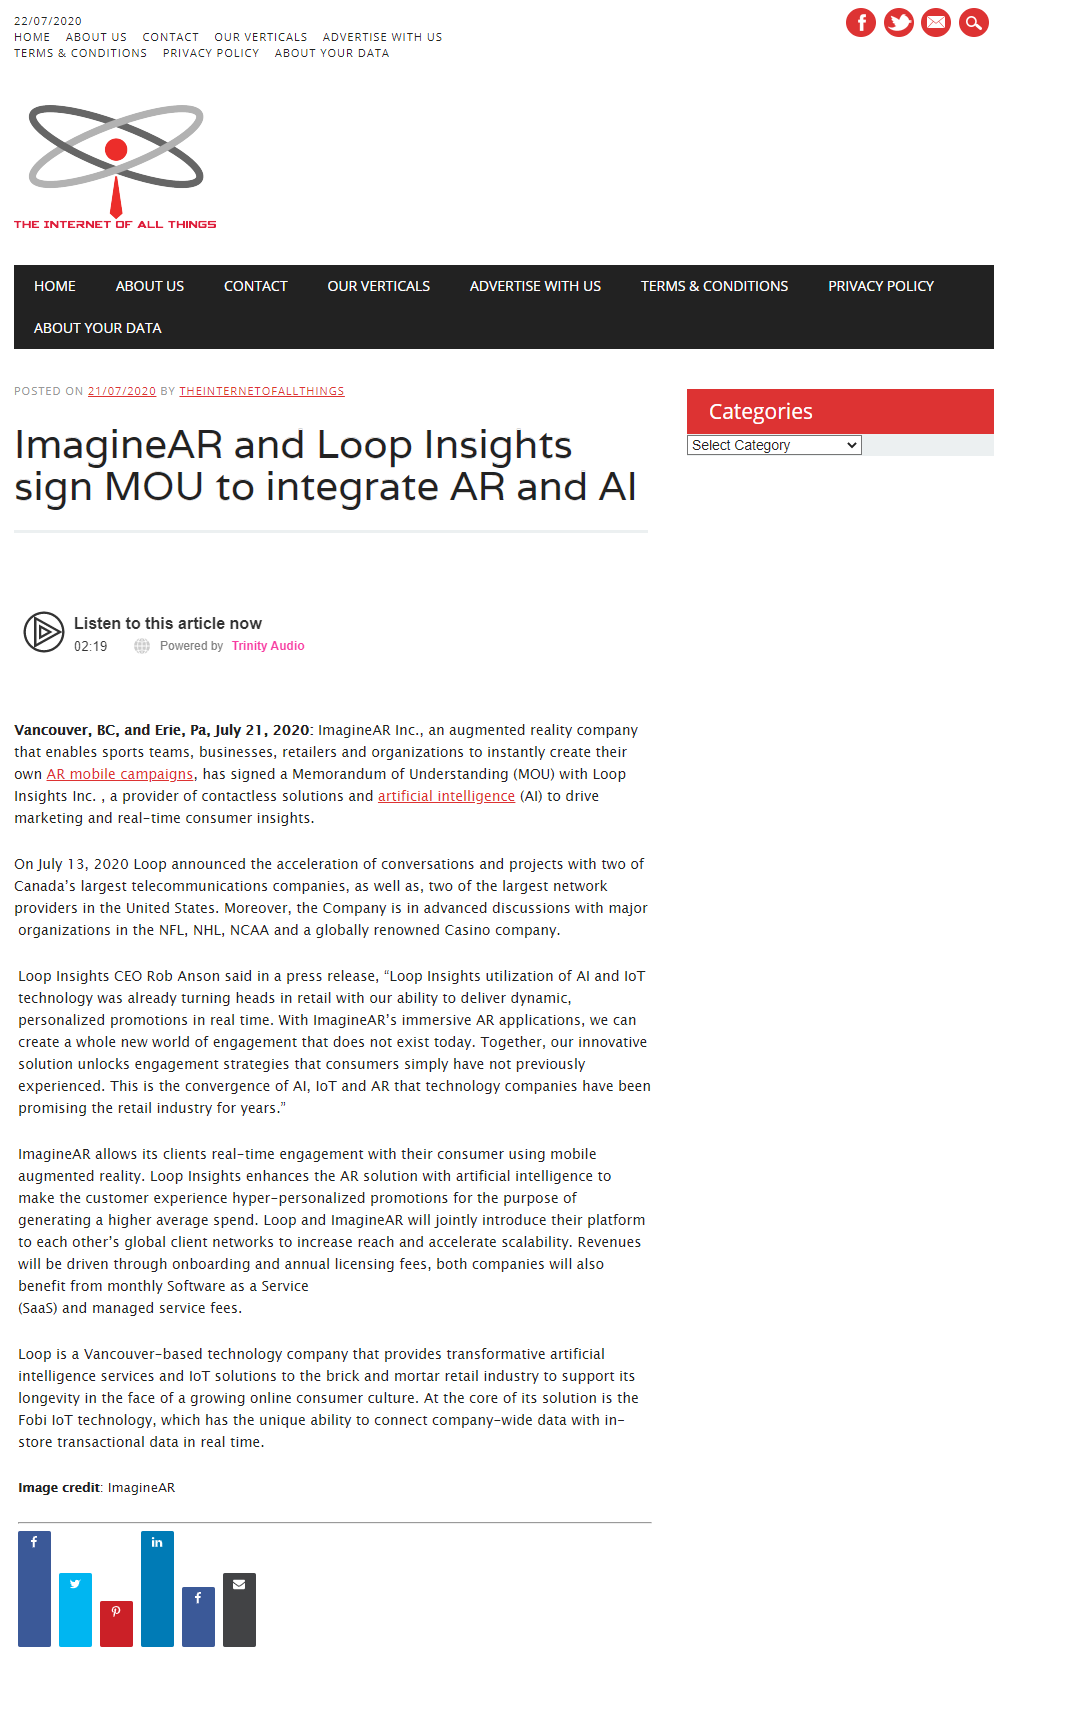 ImagineAR and Loop Insights sign MOU to integrate AR and AI